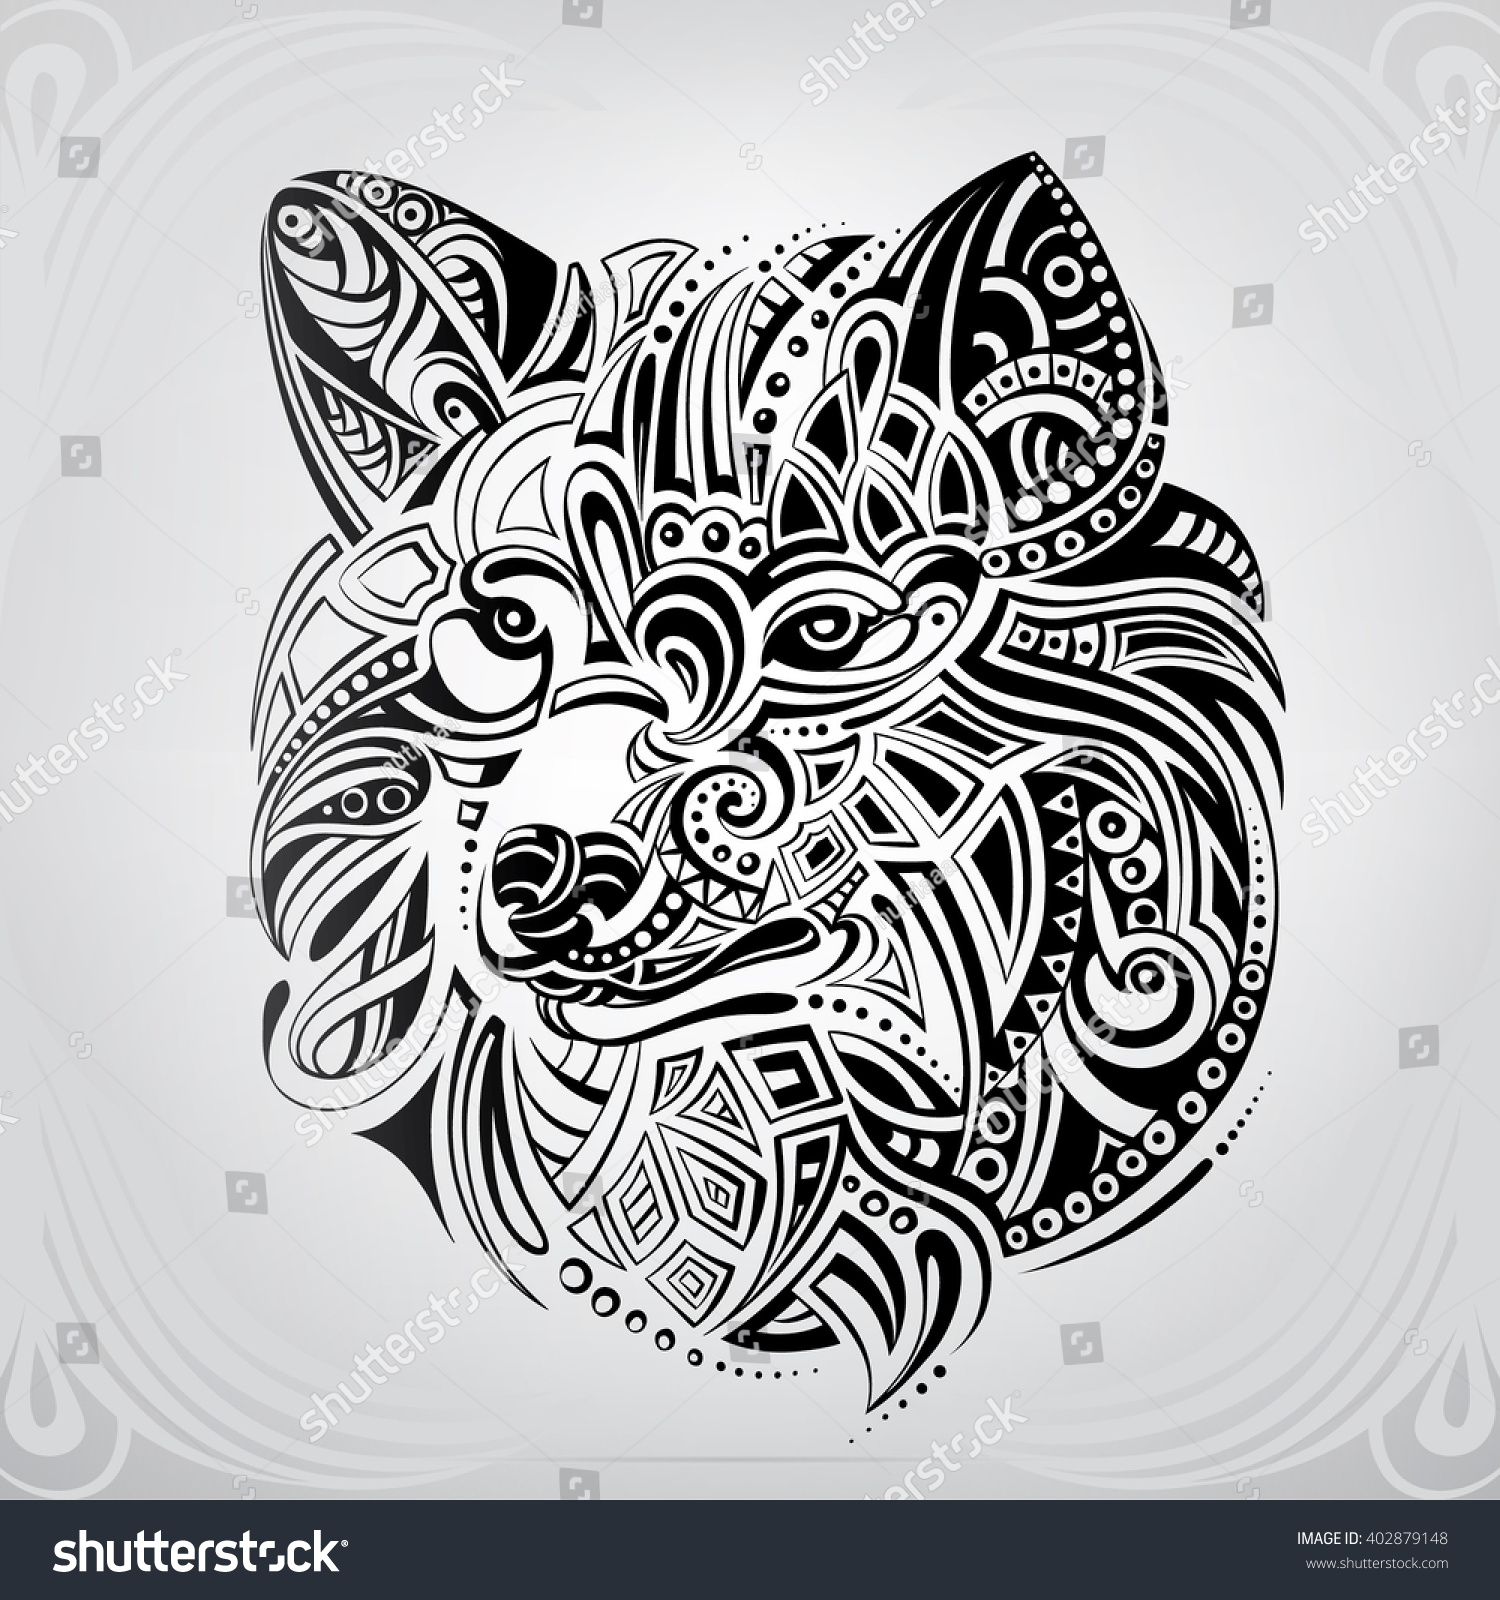 SVG of Silhouette of the head of a wolf in an ornament svg